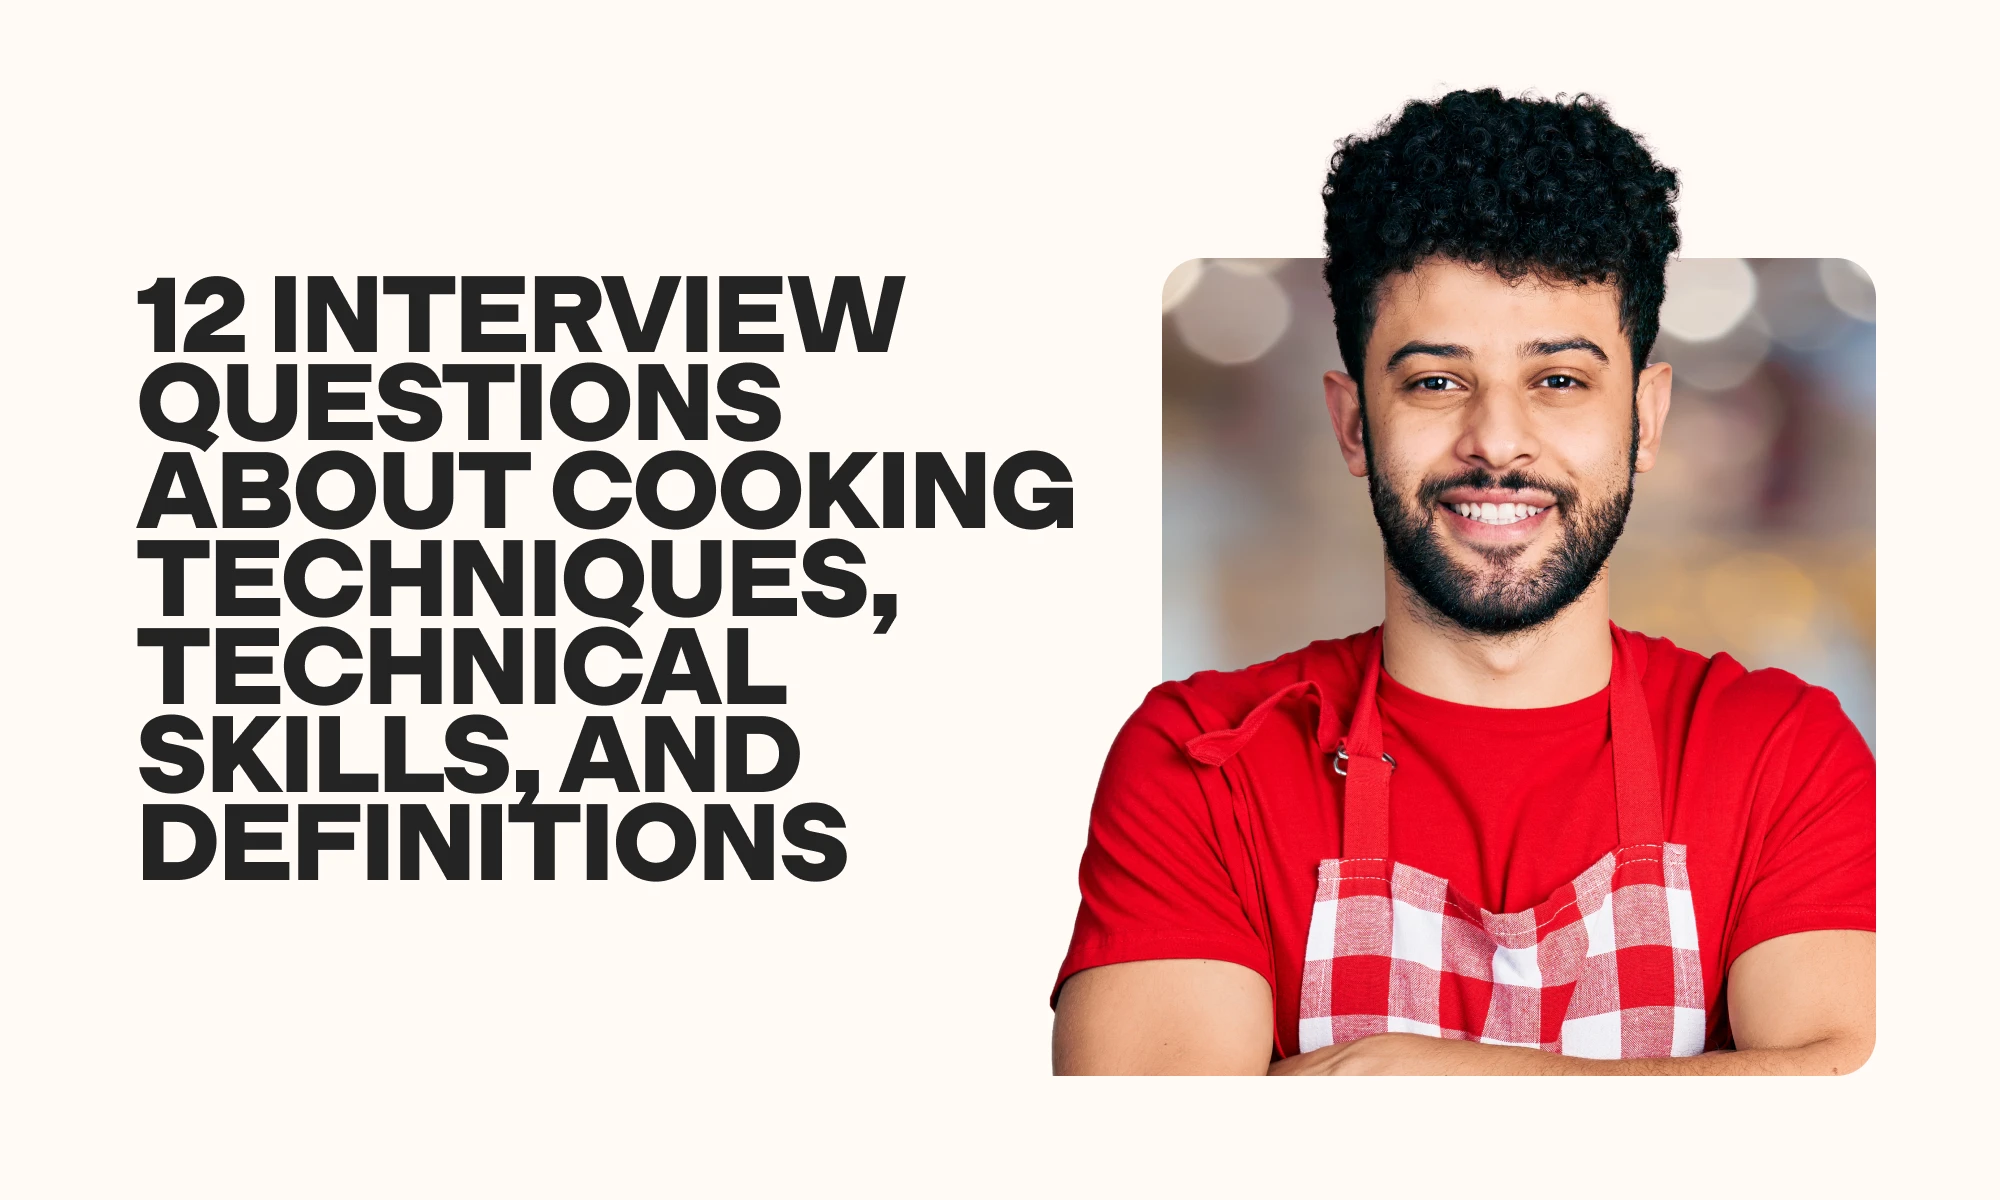 12 interview questions about cooking techniques, technical skills, and definitions